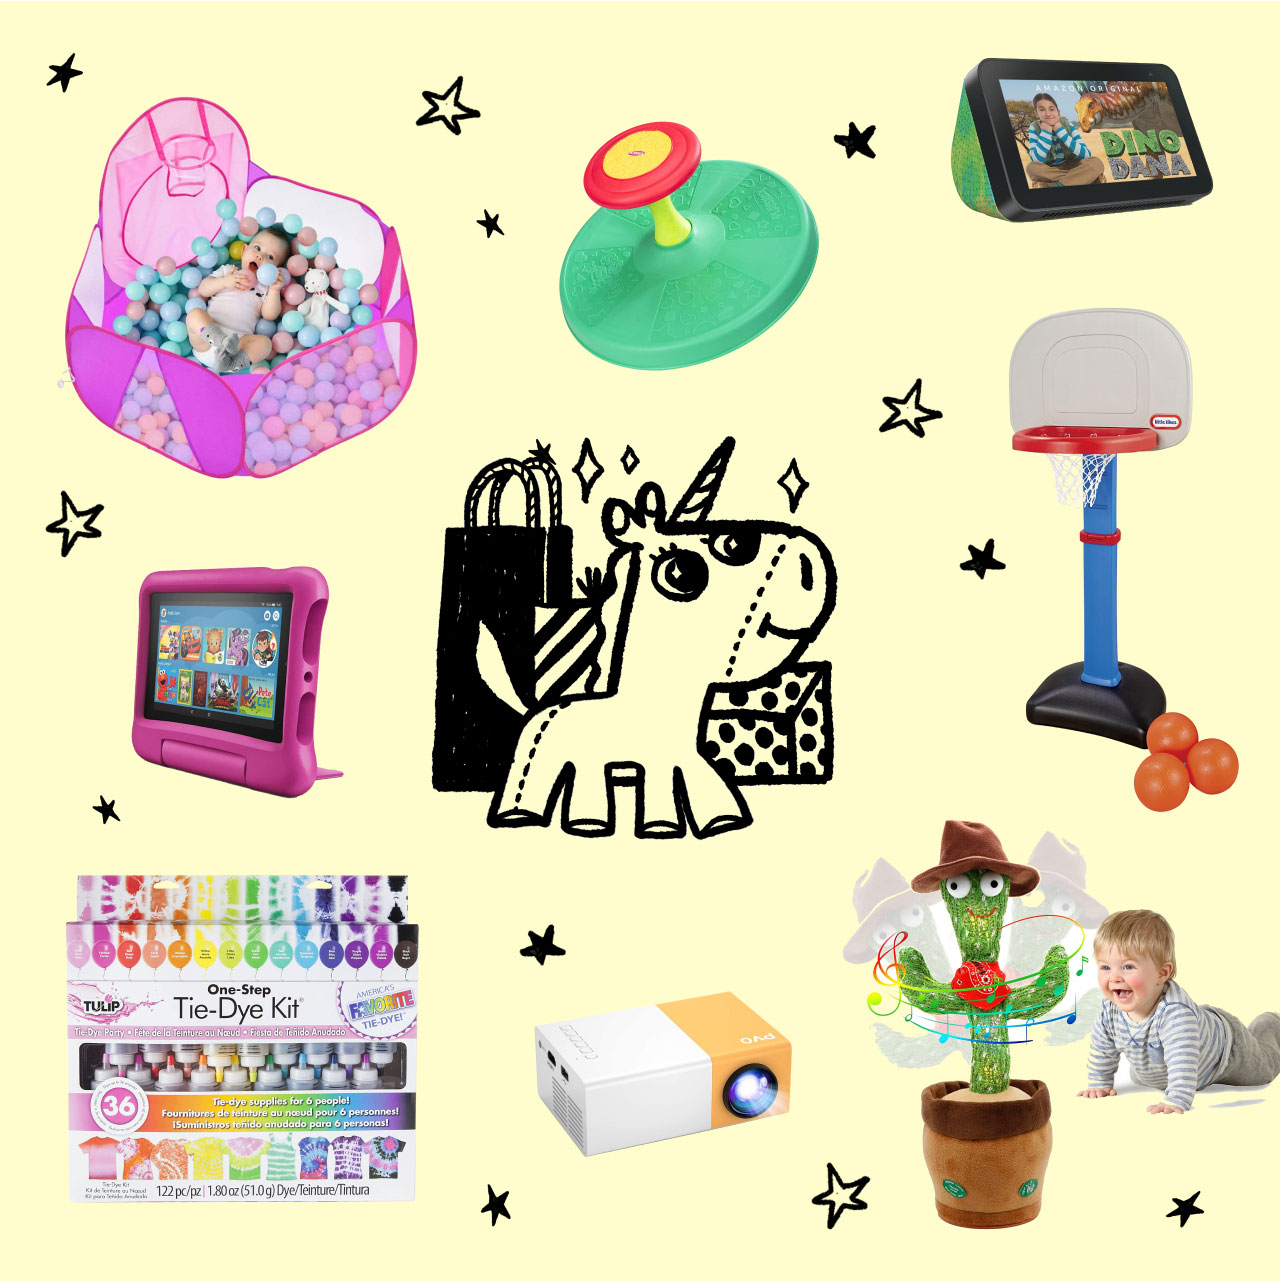 Assortment of birthday gifts for kids